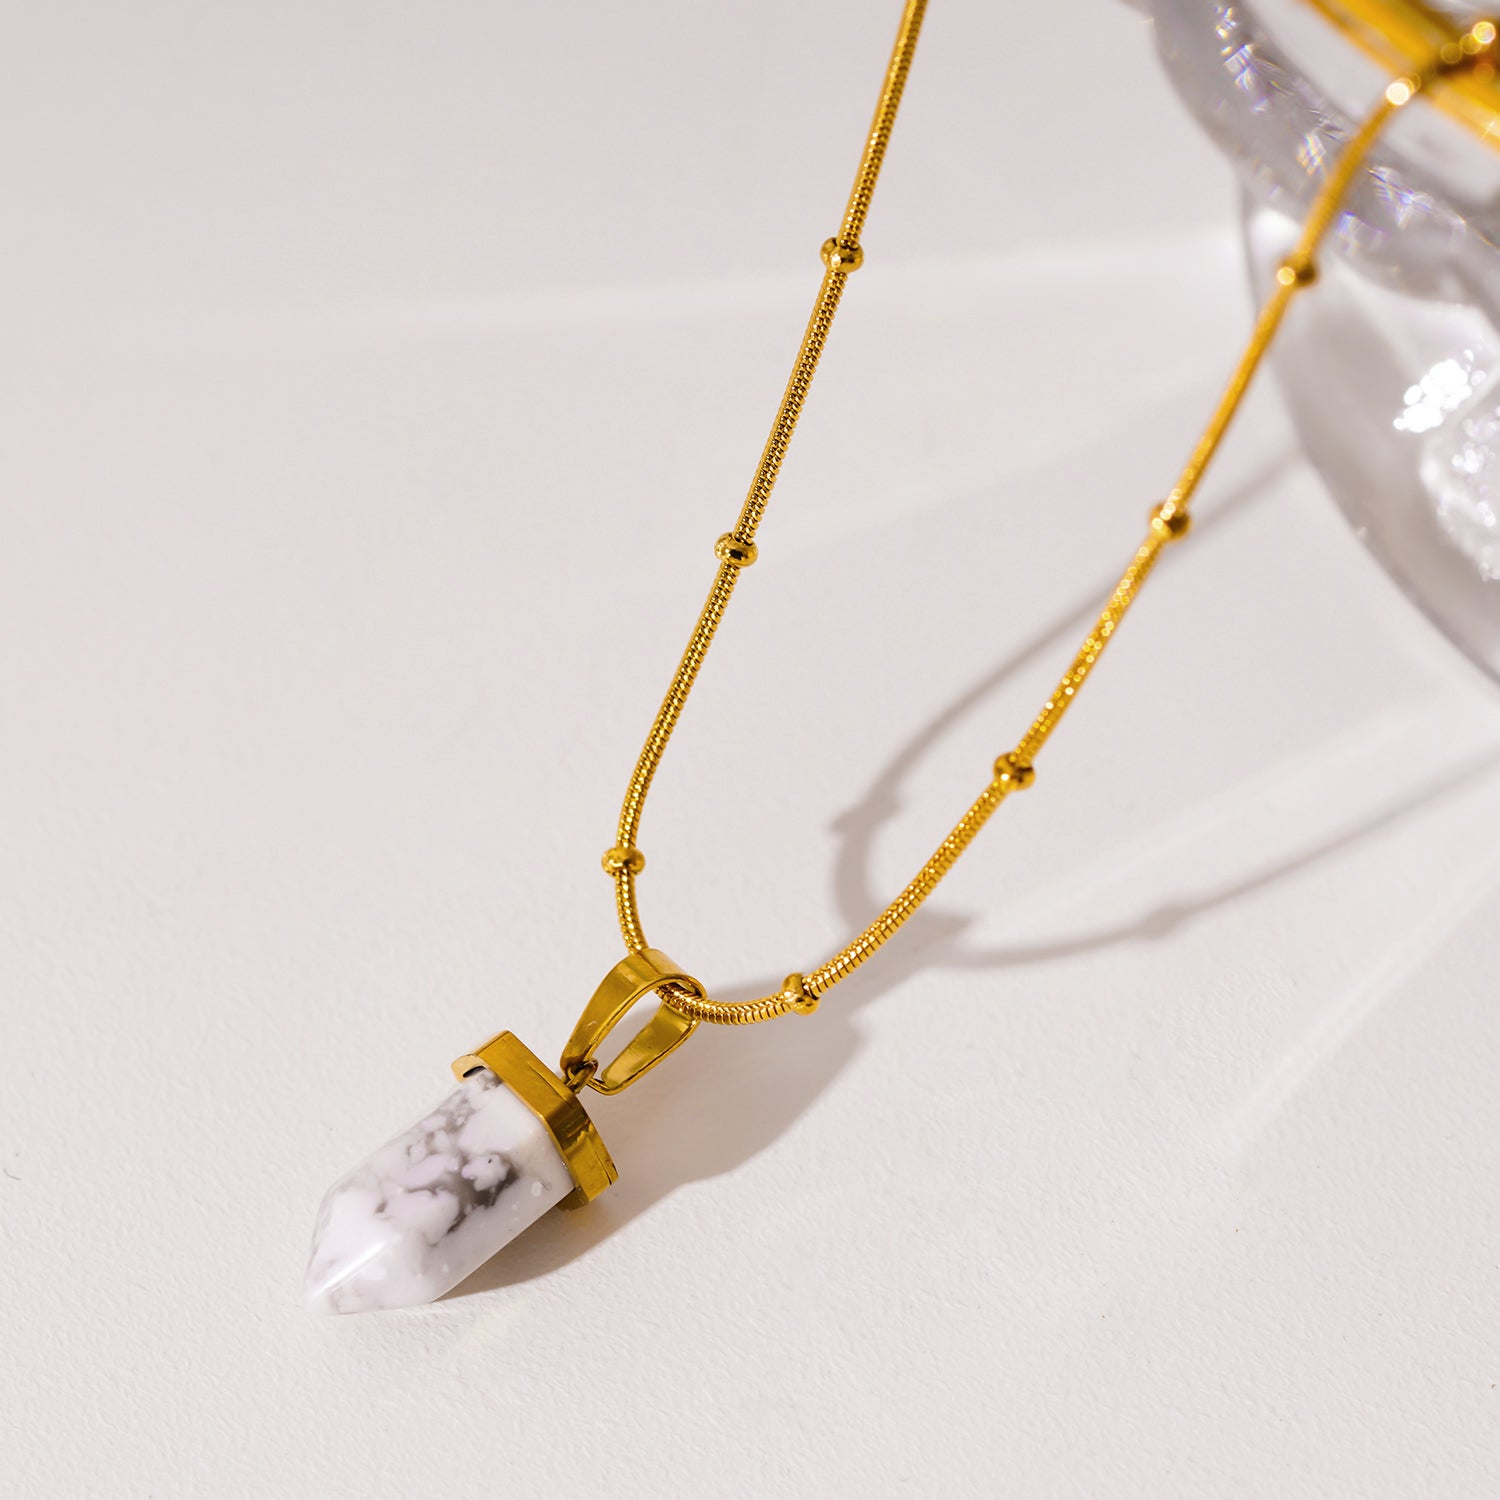 Style AMELIE 2330: White Turquoise Stone Pendant Anchored on a Beaded Snake Skin Textured Chain Necklace.